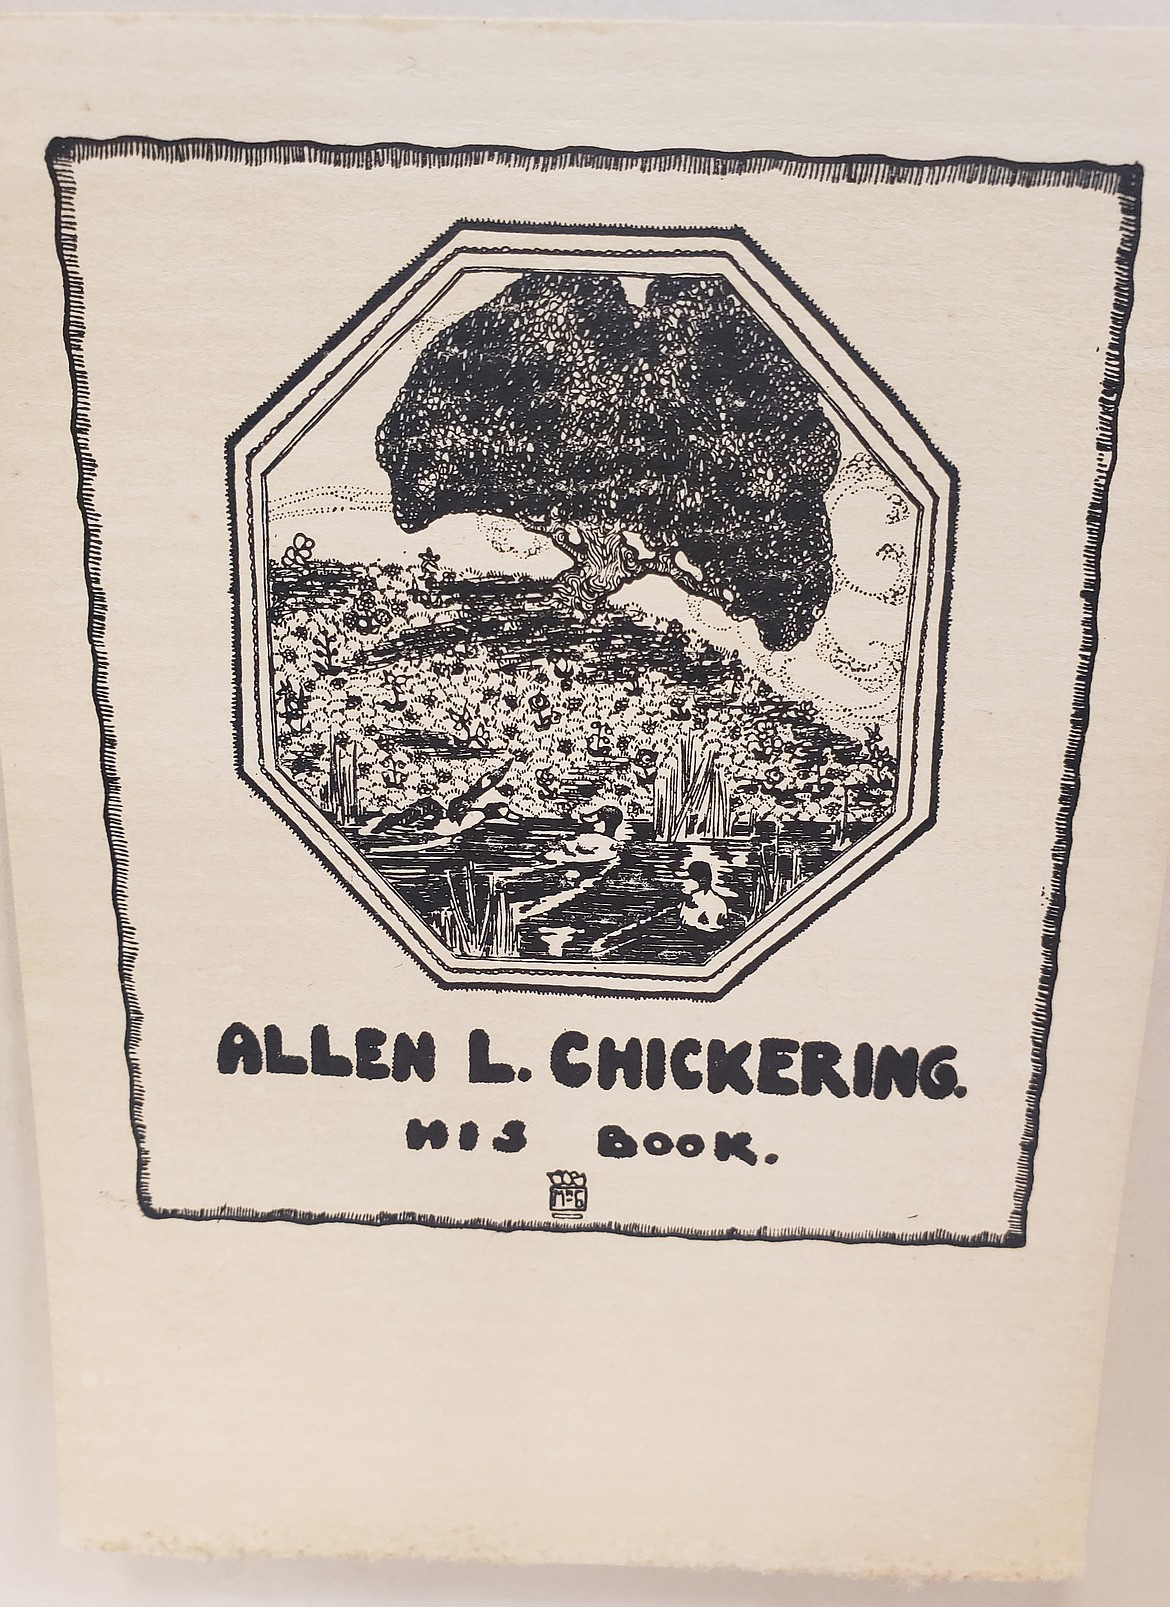 A bookplate affixed to one of the books in the Allen L. Chickering Collection at the FVCC library